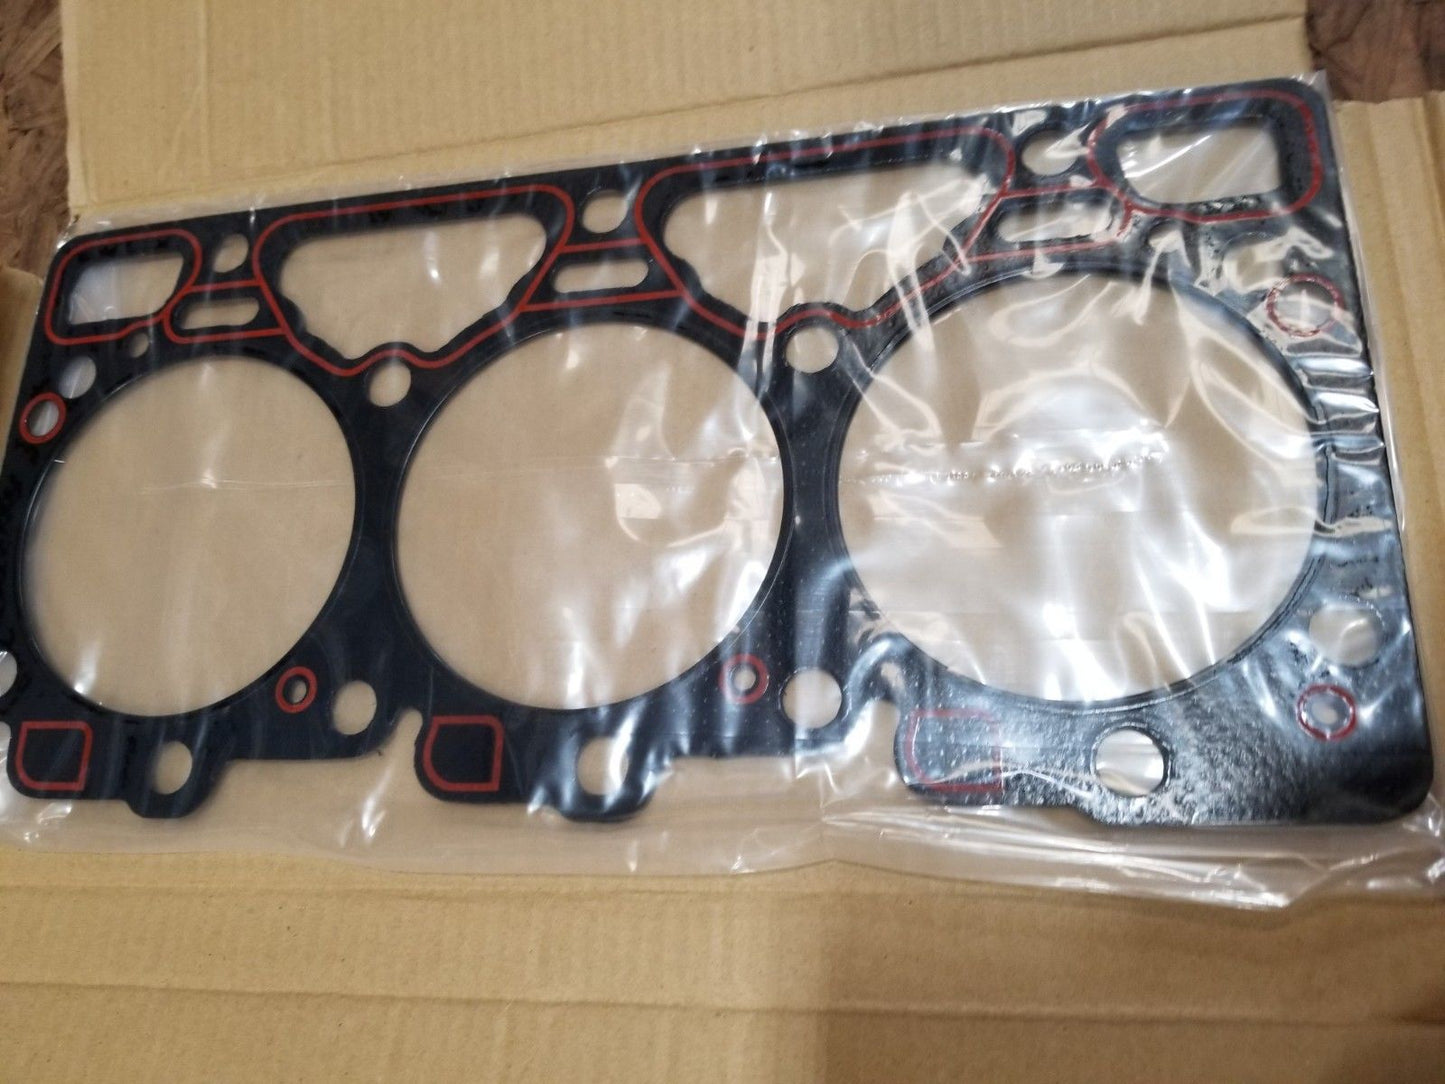 Multi-Fuel Engine Head Gasket with Integral Fire Ring M35A2, M36A2, M109A3, M275